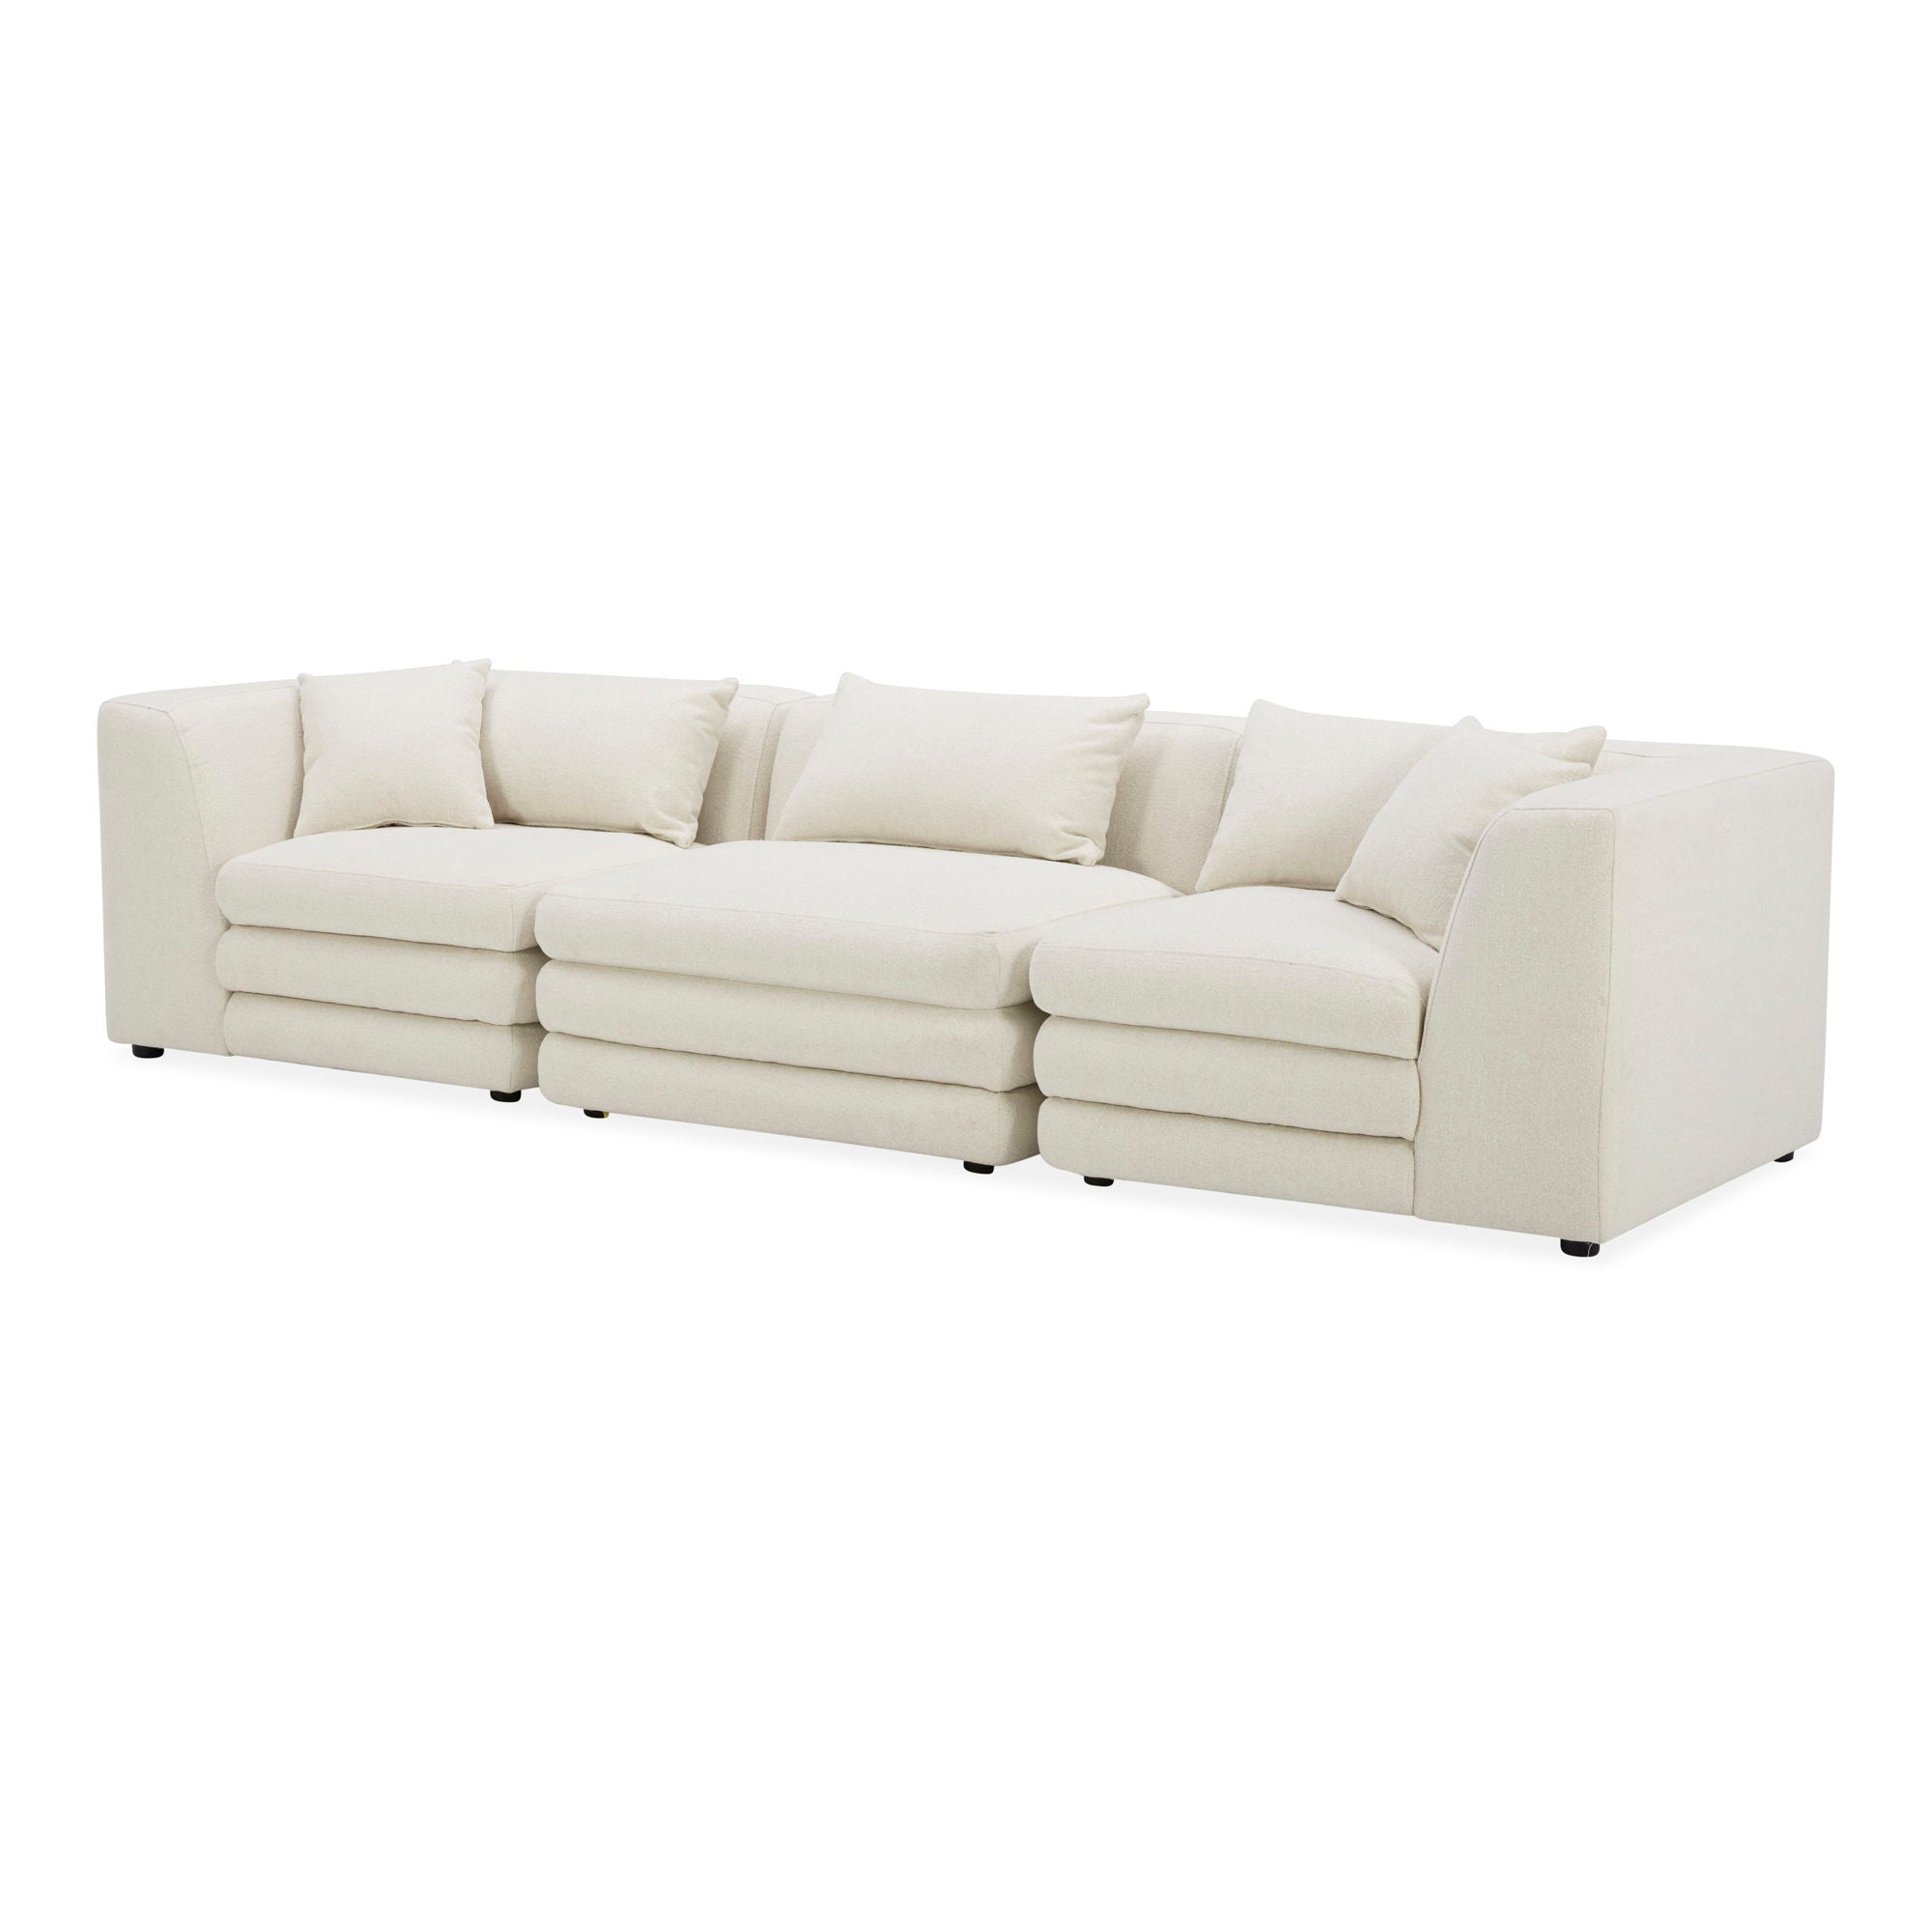 Lowtide - Modular Sofa - Warm White-Stationary Sectionals-American Furniture Outlet